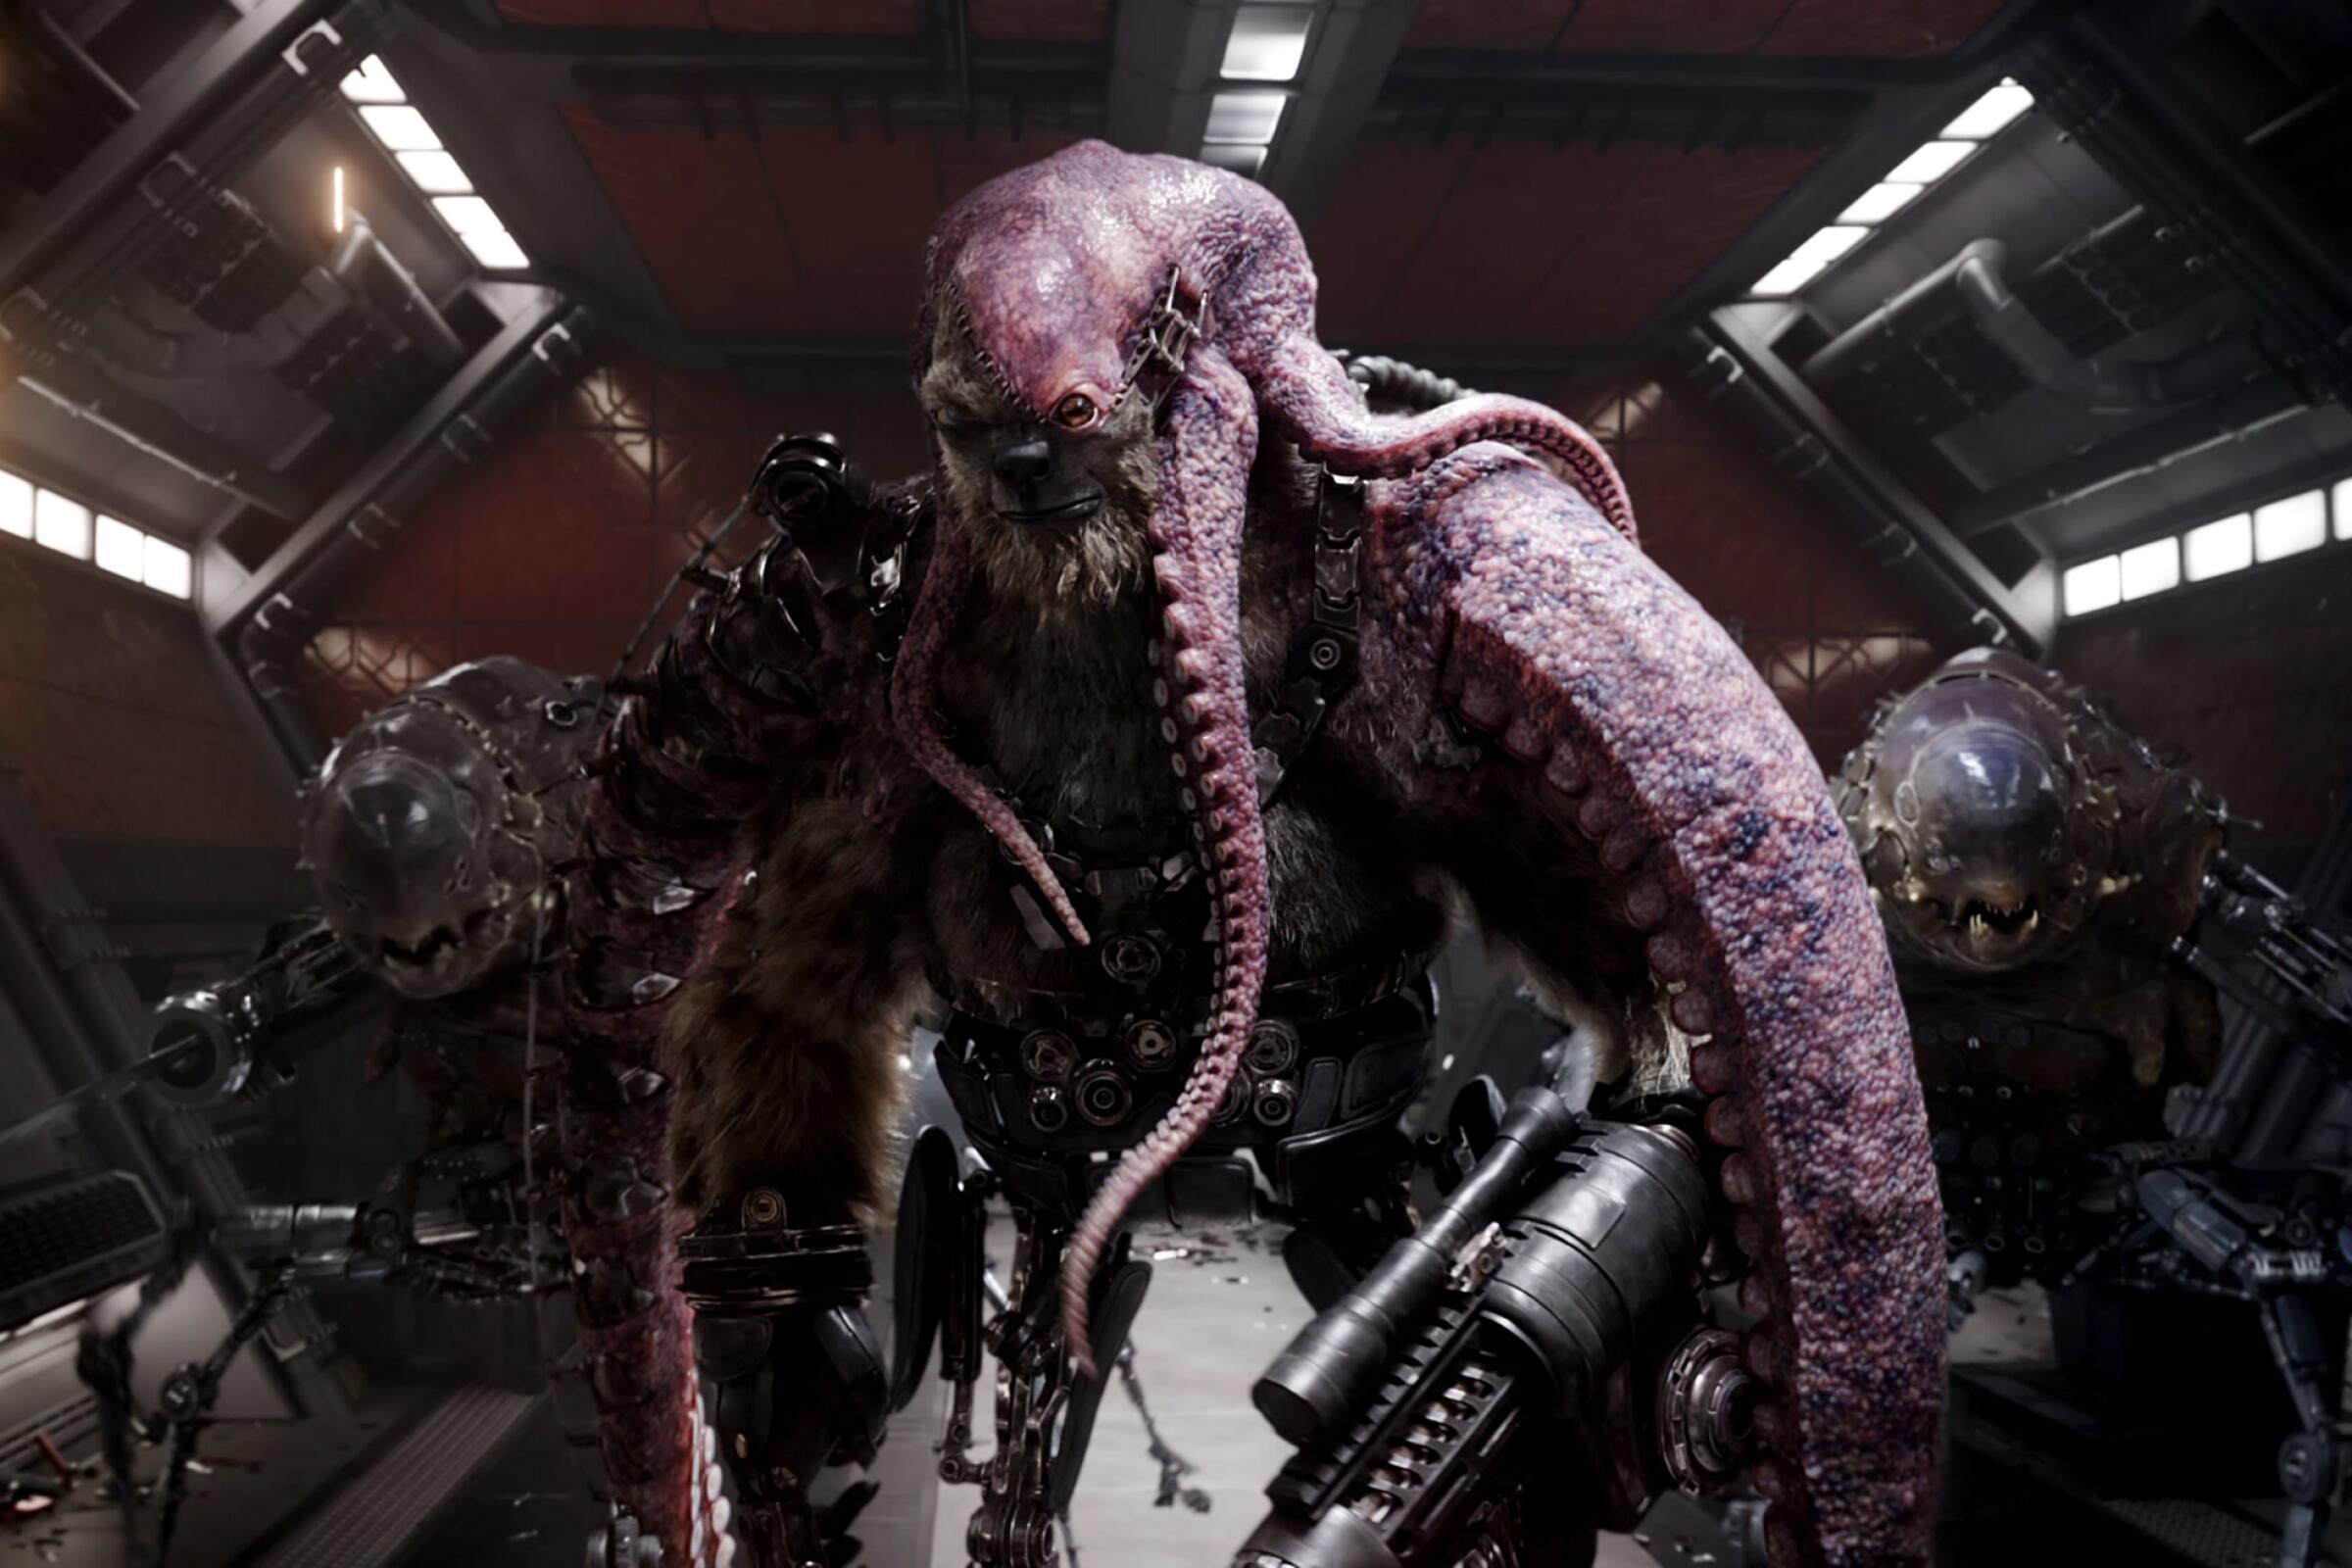 Giant biomechanical monsters with tentacles and blaster guns defend a spaceship in "Guardians of the Galaxy Vol. 3."